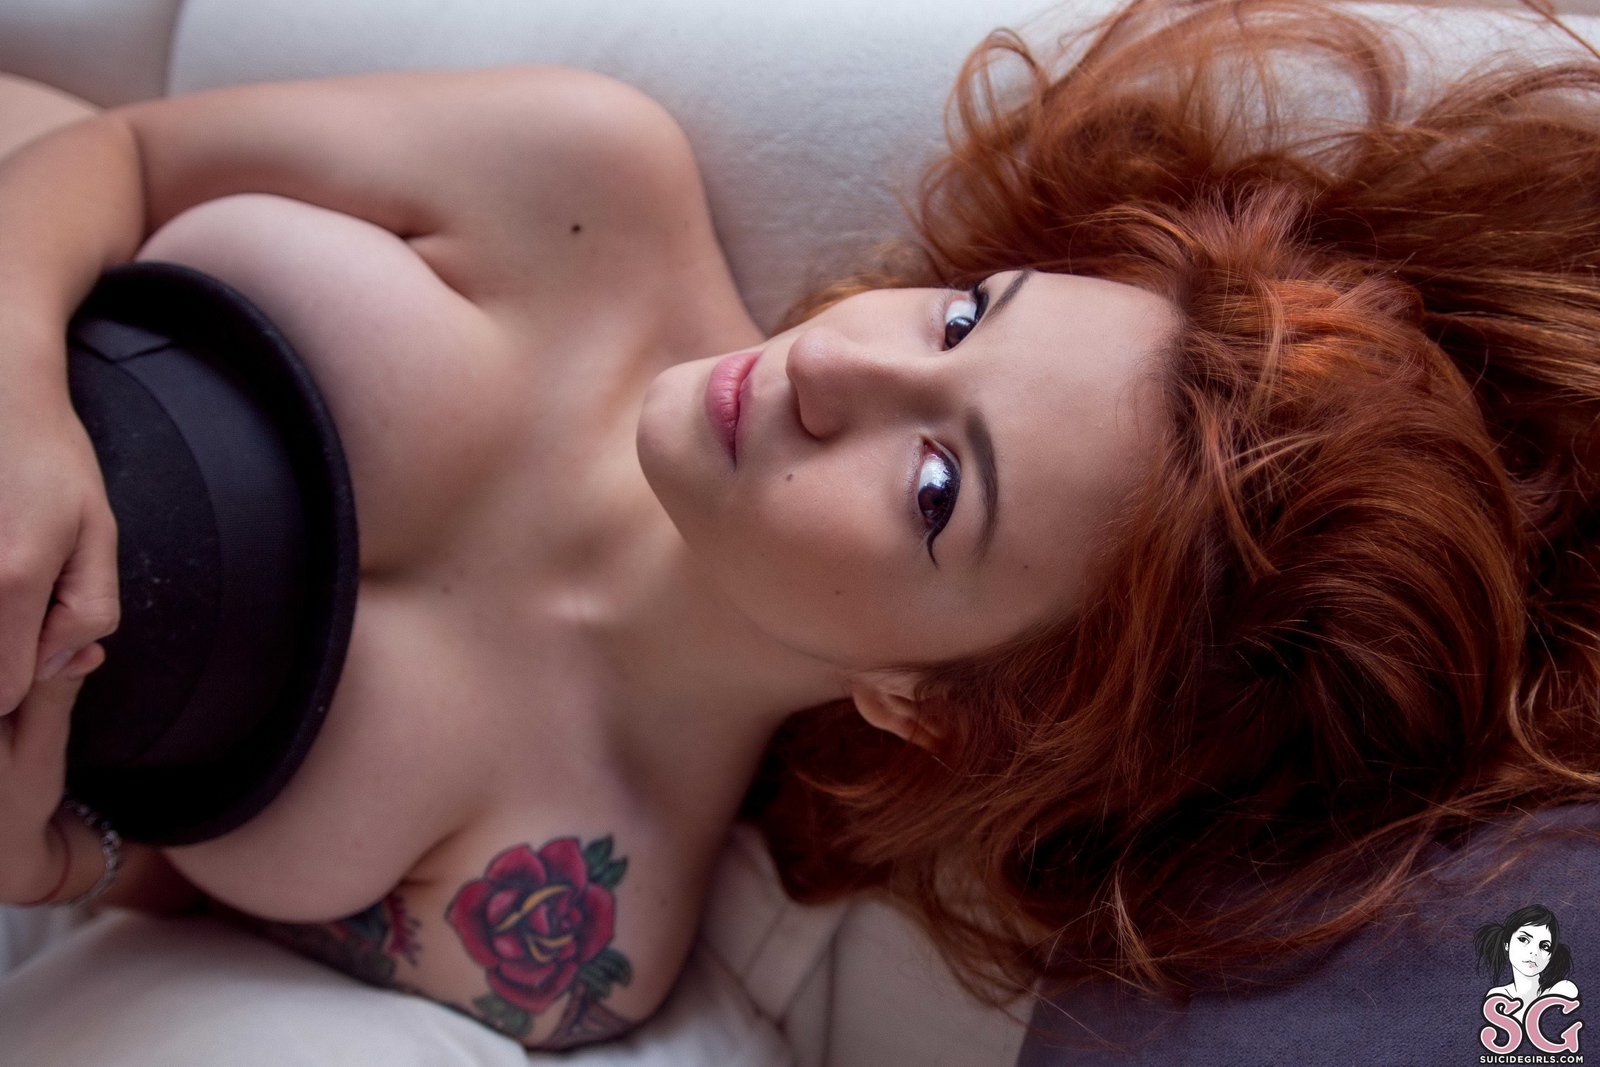 mille-hat-redhead-naked-tattoo-nighty-sofa-suicide-girls-16